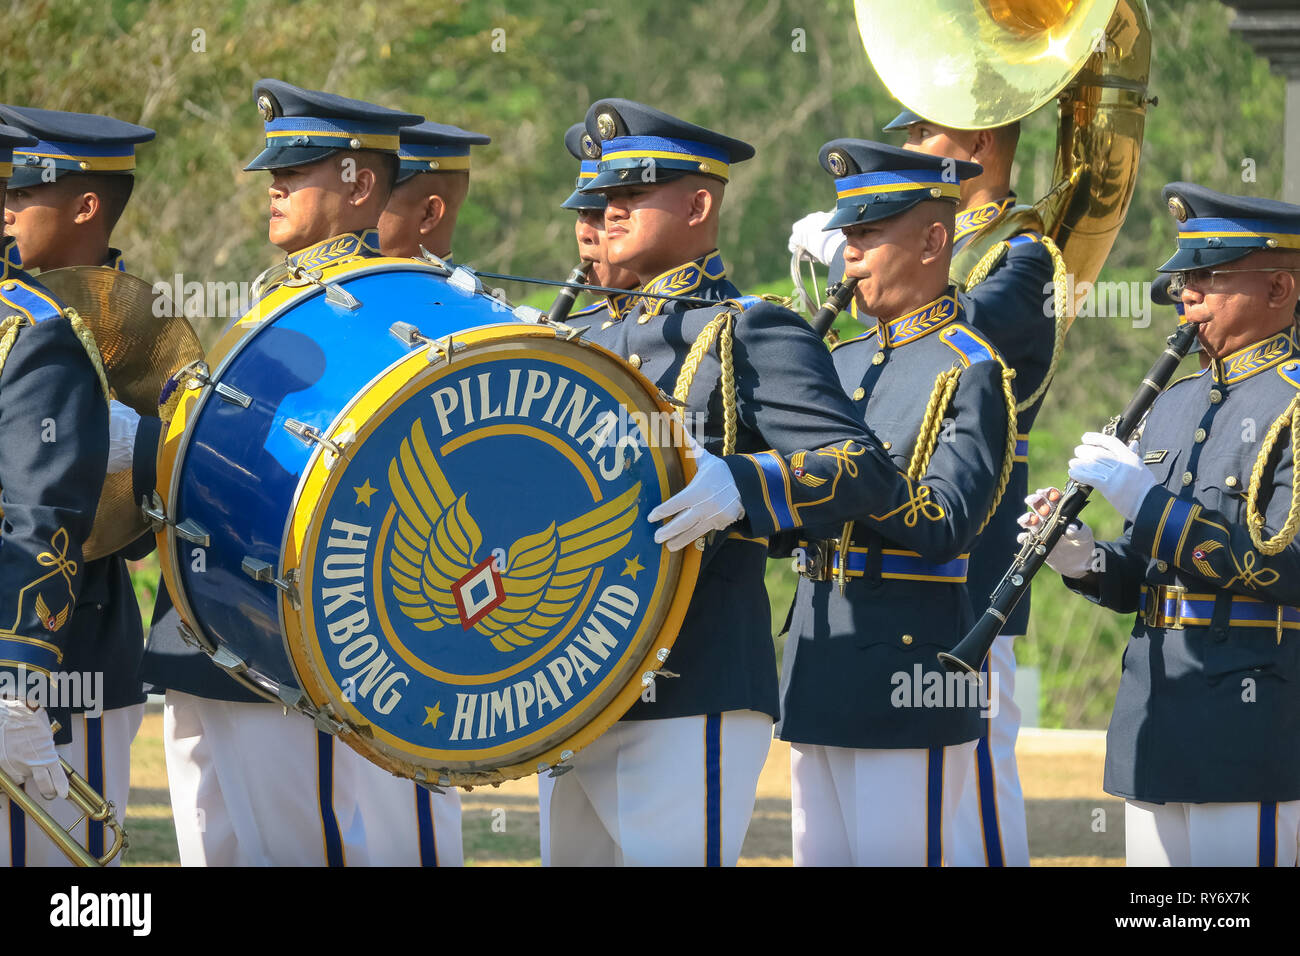 Military Marching Band With Bass Drum - Capas Shrine, Tarlac, Philippines Stock Photo